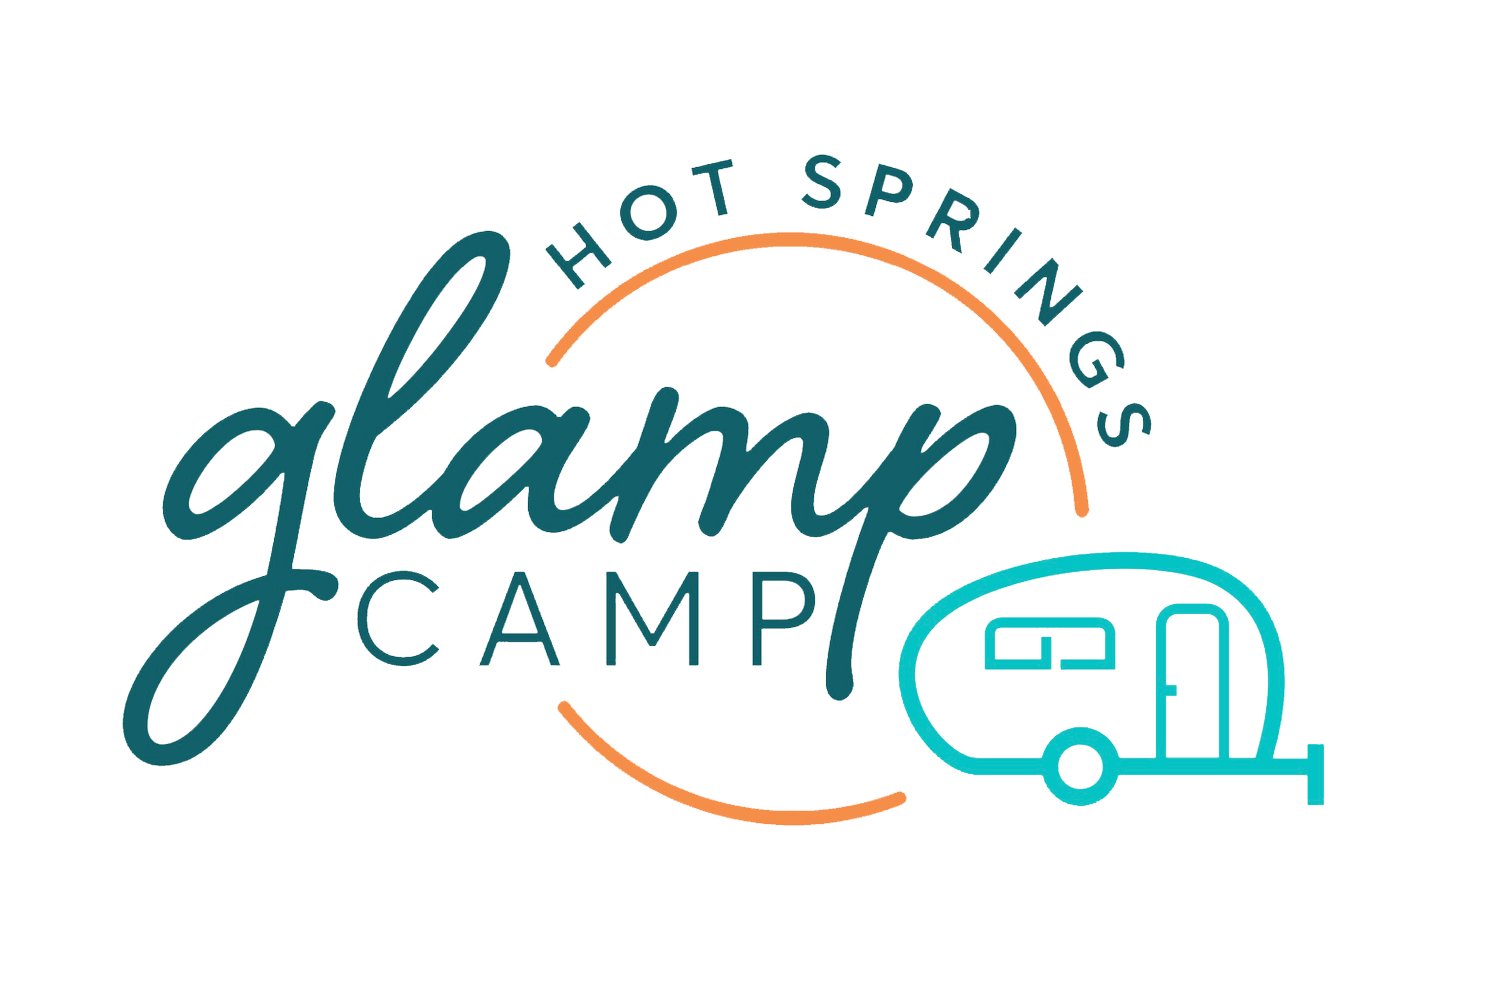 RV van sites in TorC New Mexico — Hot Springs Glamp Camp